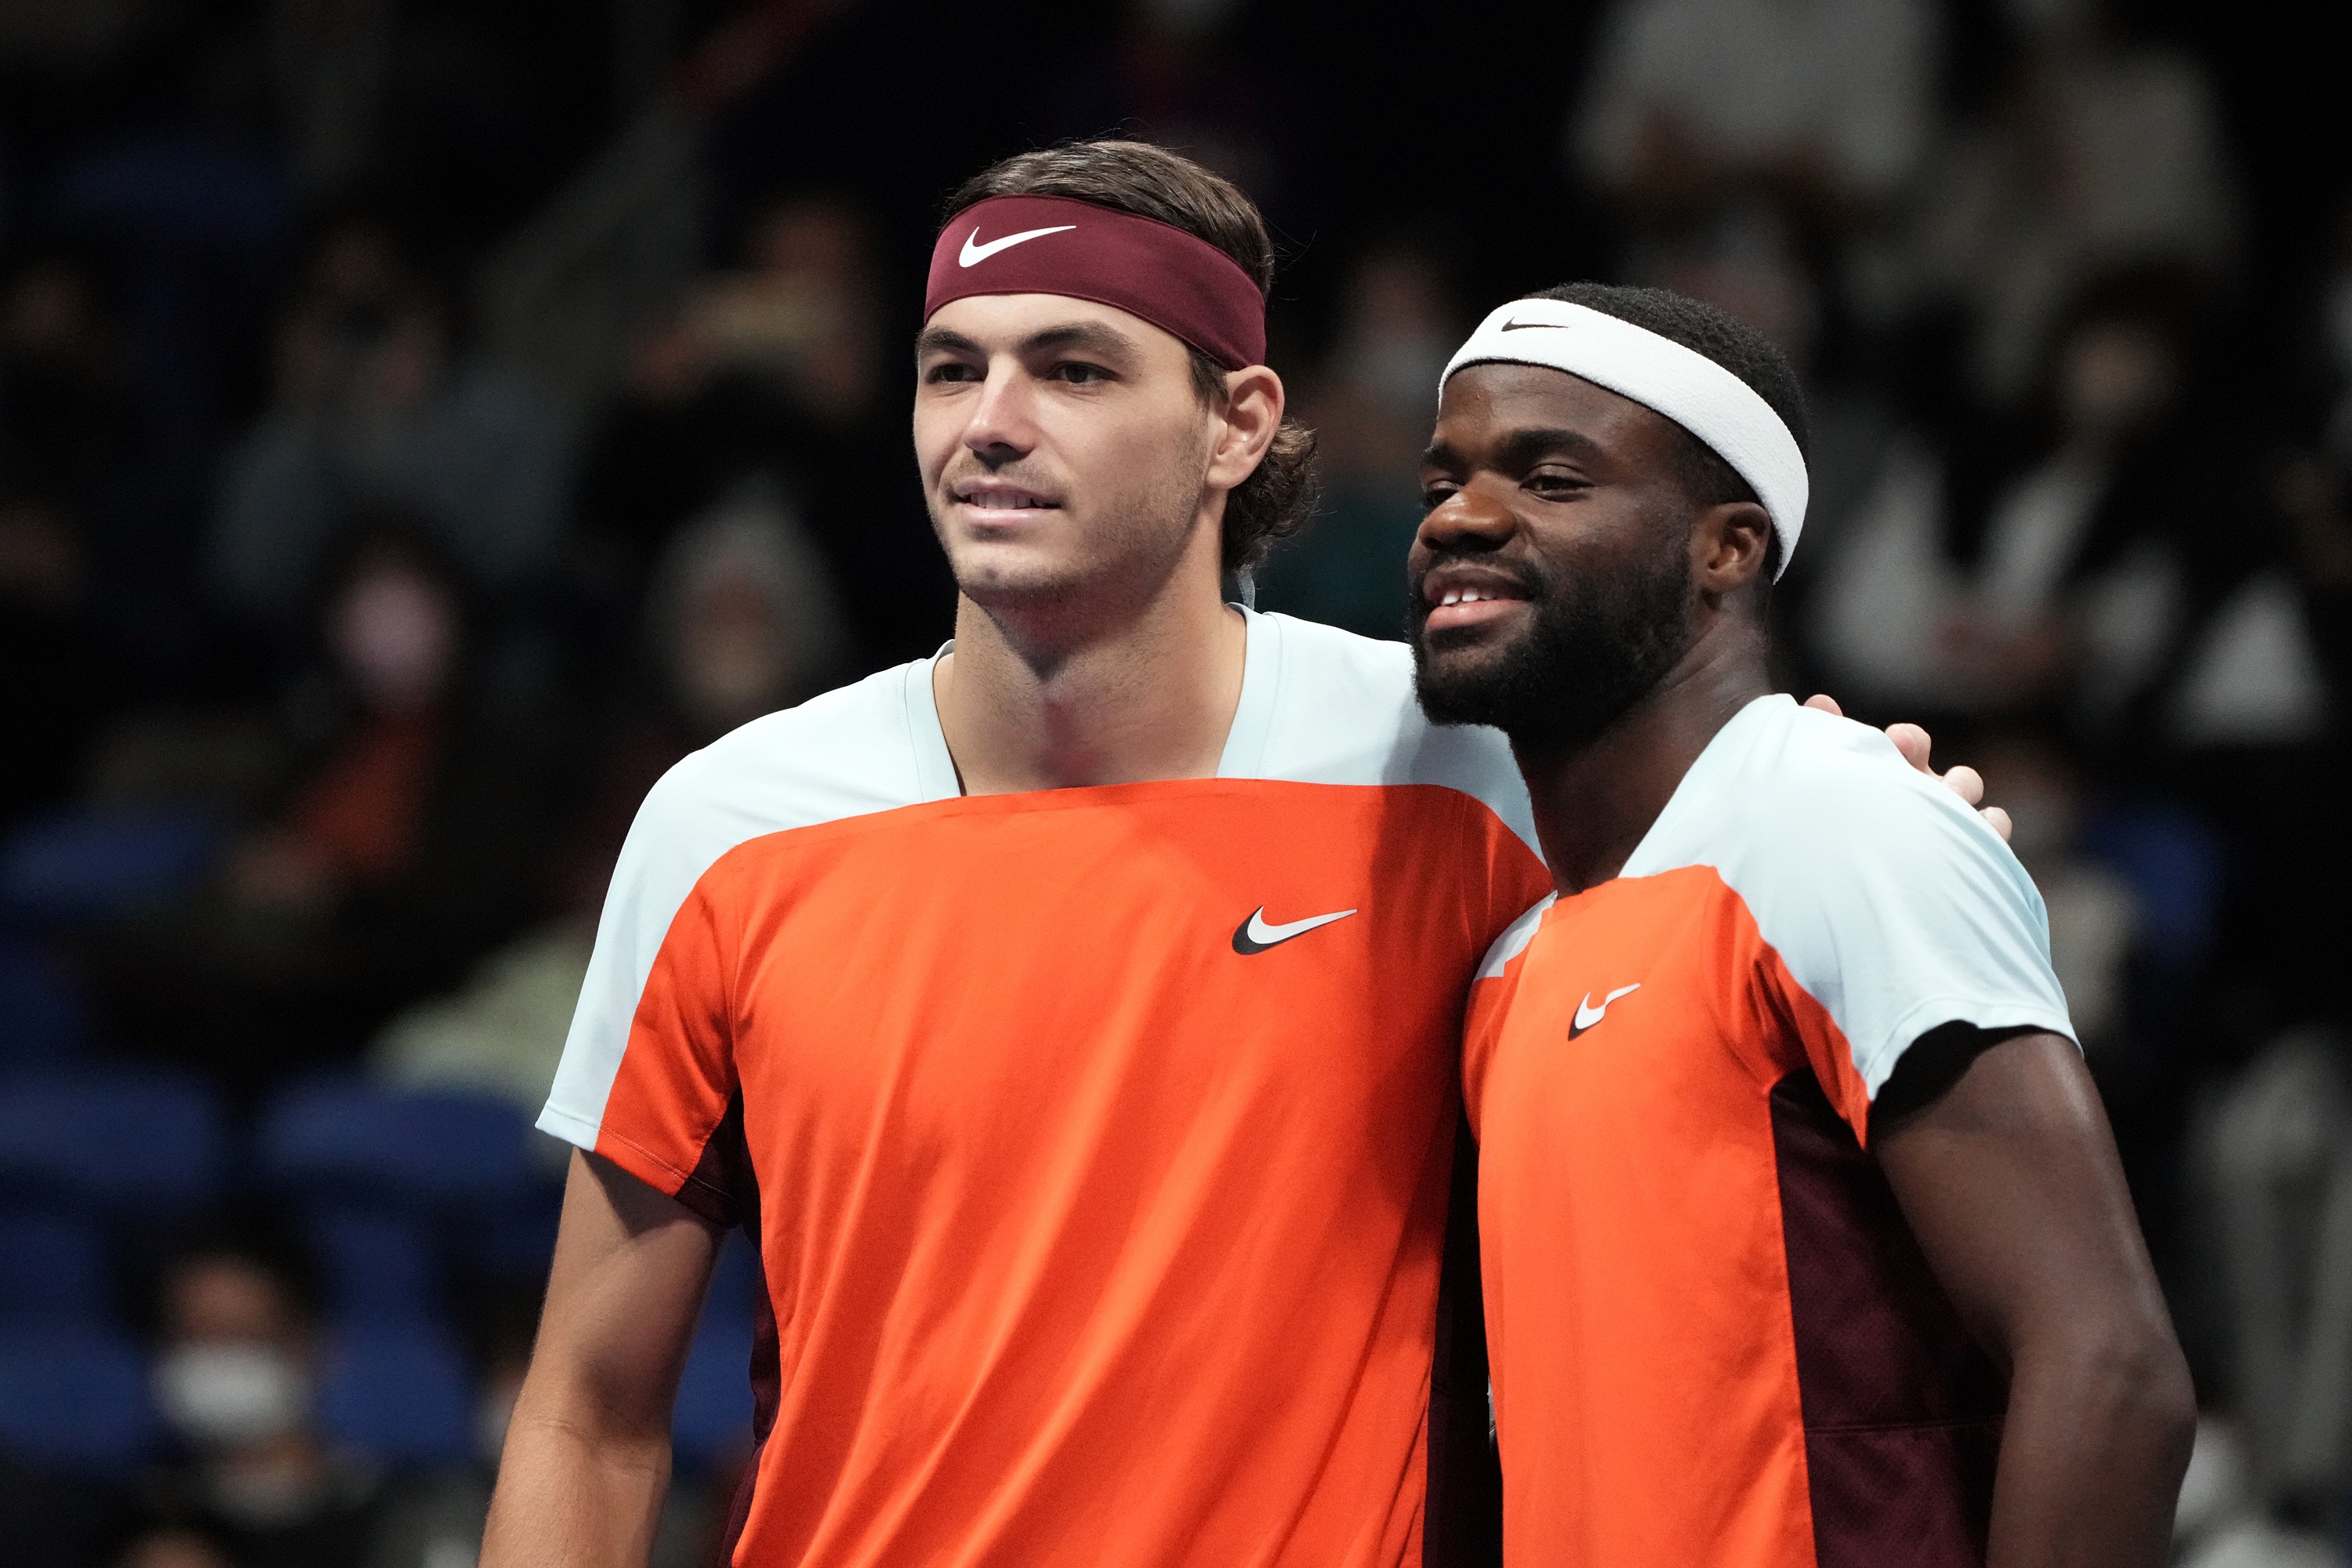 Boasting career-high rankings, Taylor Fritz and Frances Tiafoe are living  their best tennis lives